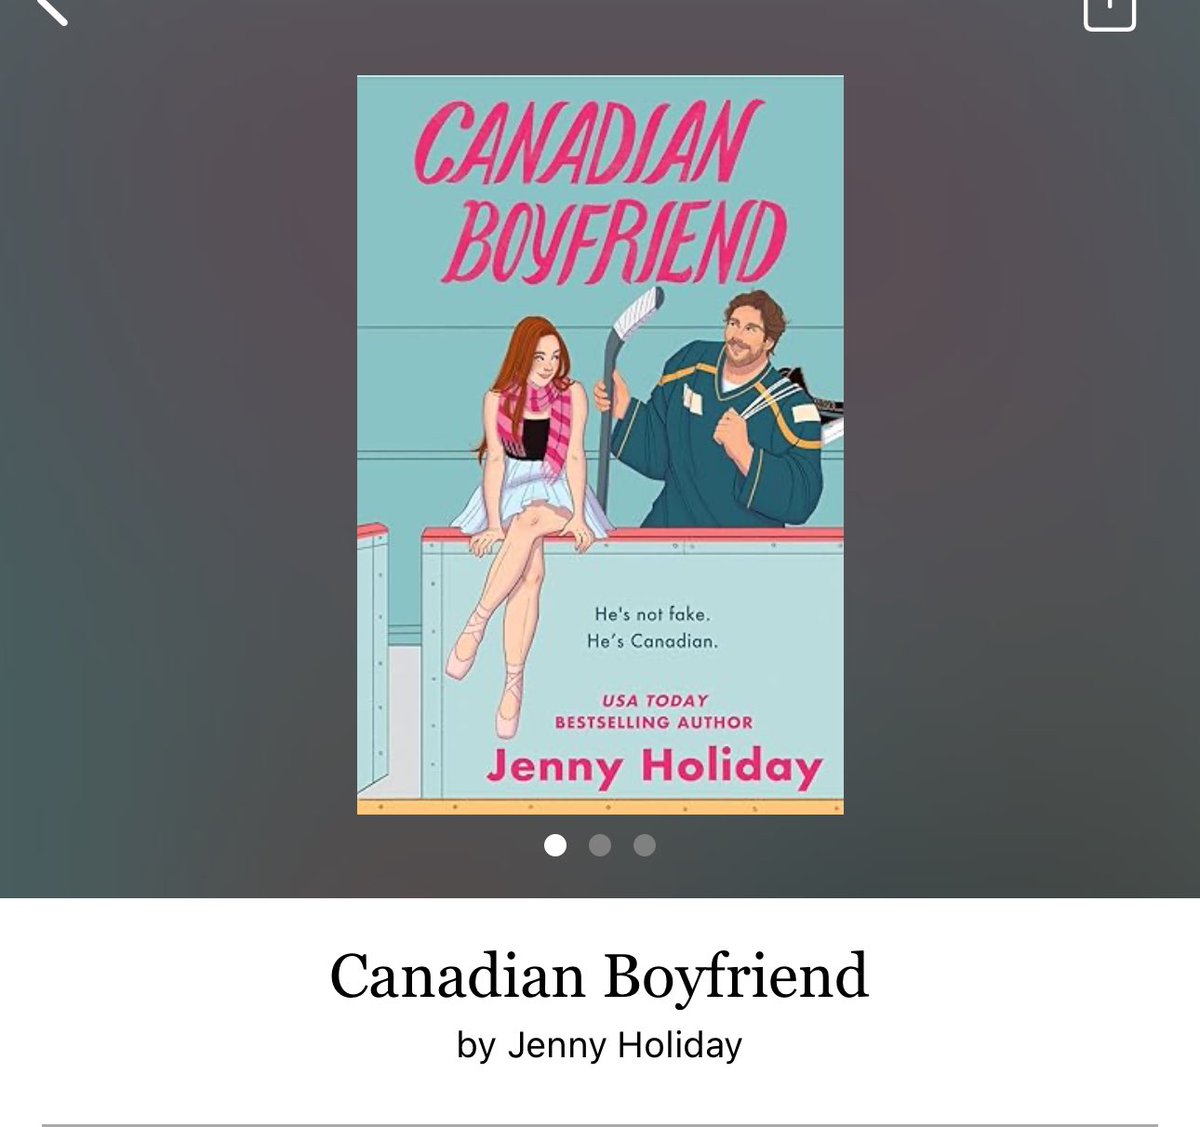 Canadian Boyfriend by Jenny Holiday 

#CanadianBoyfriend #6235 #25chapters #384pages #384of400 #NewRelease #21for6 #Audiobook #11houraudiobook #FakeCanadianBoyfriendToRealBoyfriend #AuroraAndMike #april2024 #clearingoffreadingshelves #whatsnext #readitquick